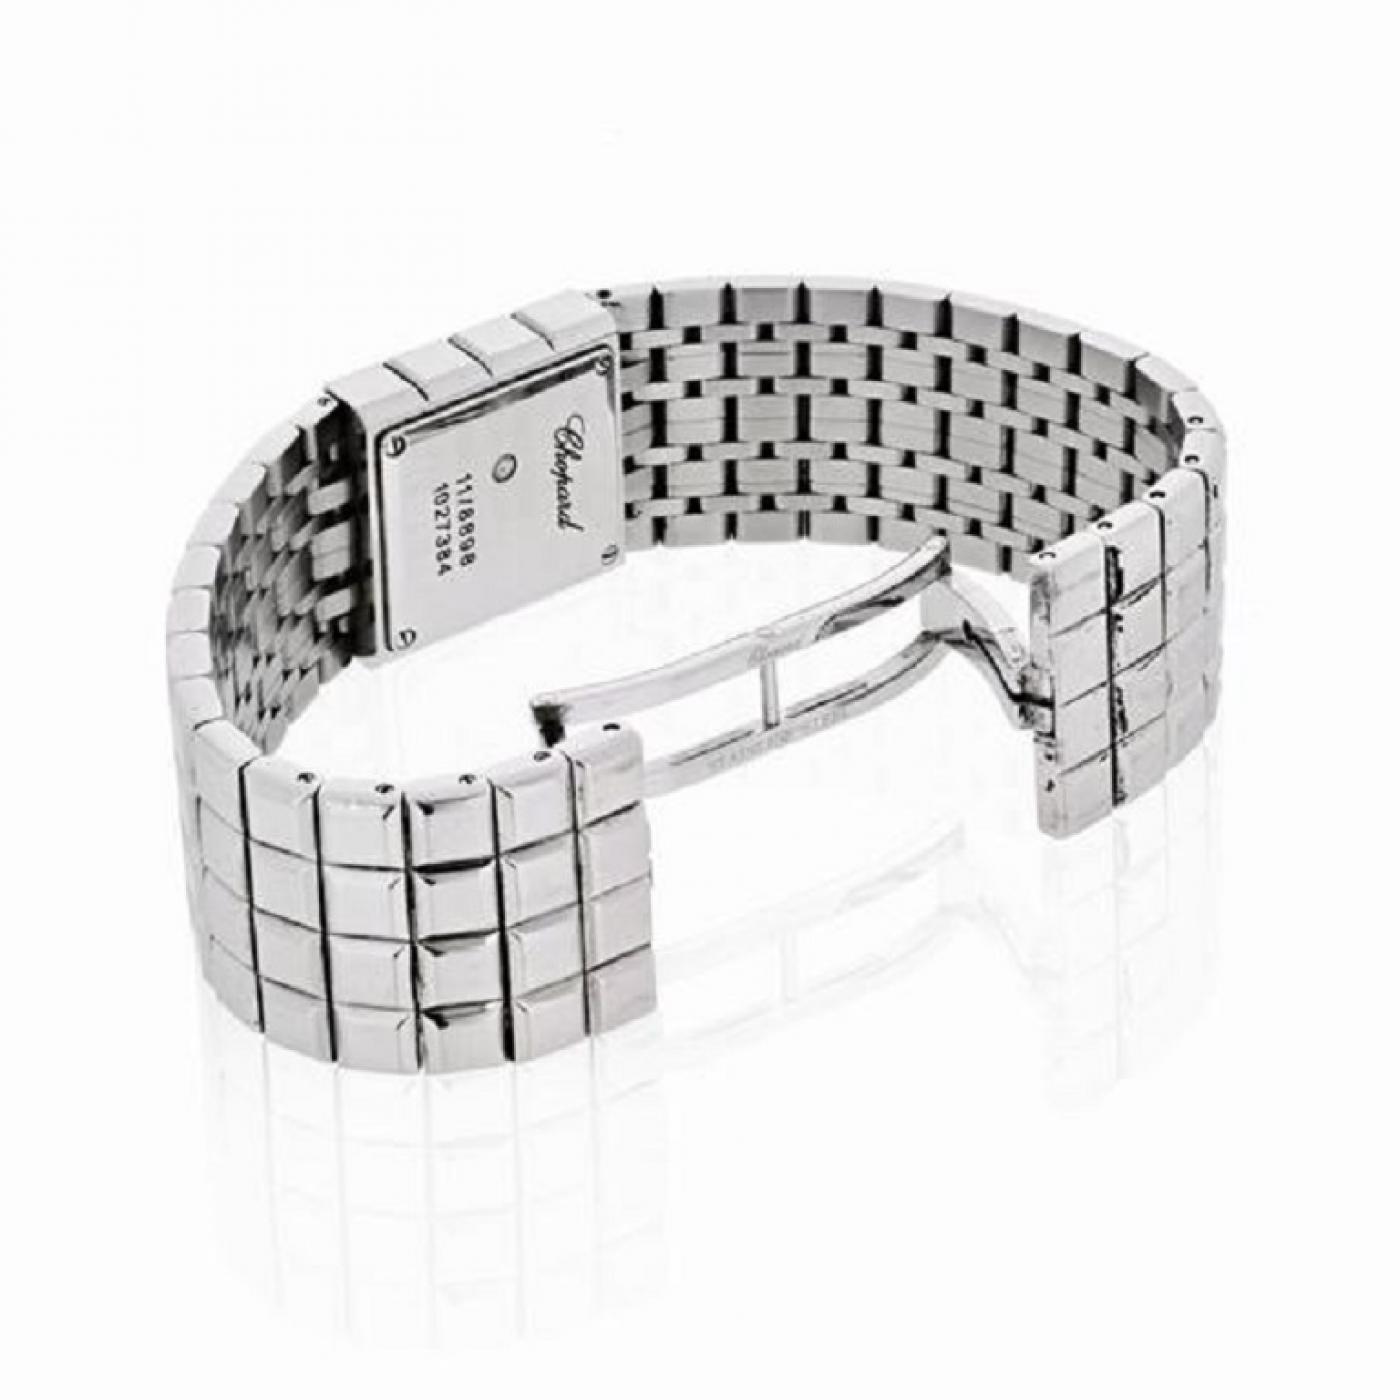 Chopard - CHOPARD STAINLESS STEEL ICE CUBE WATCH